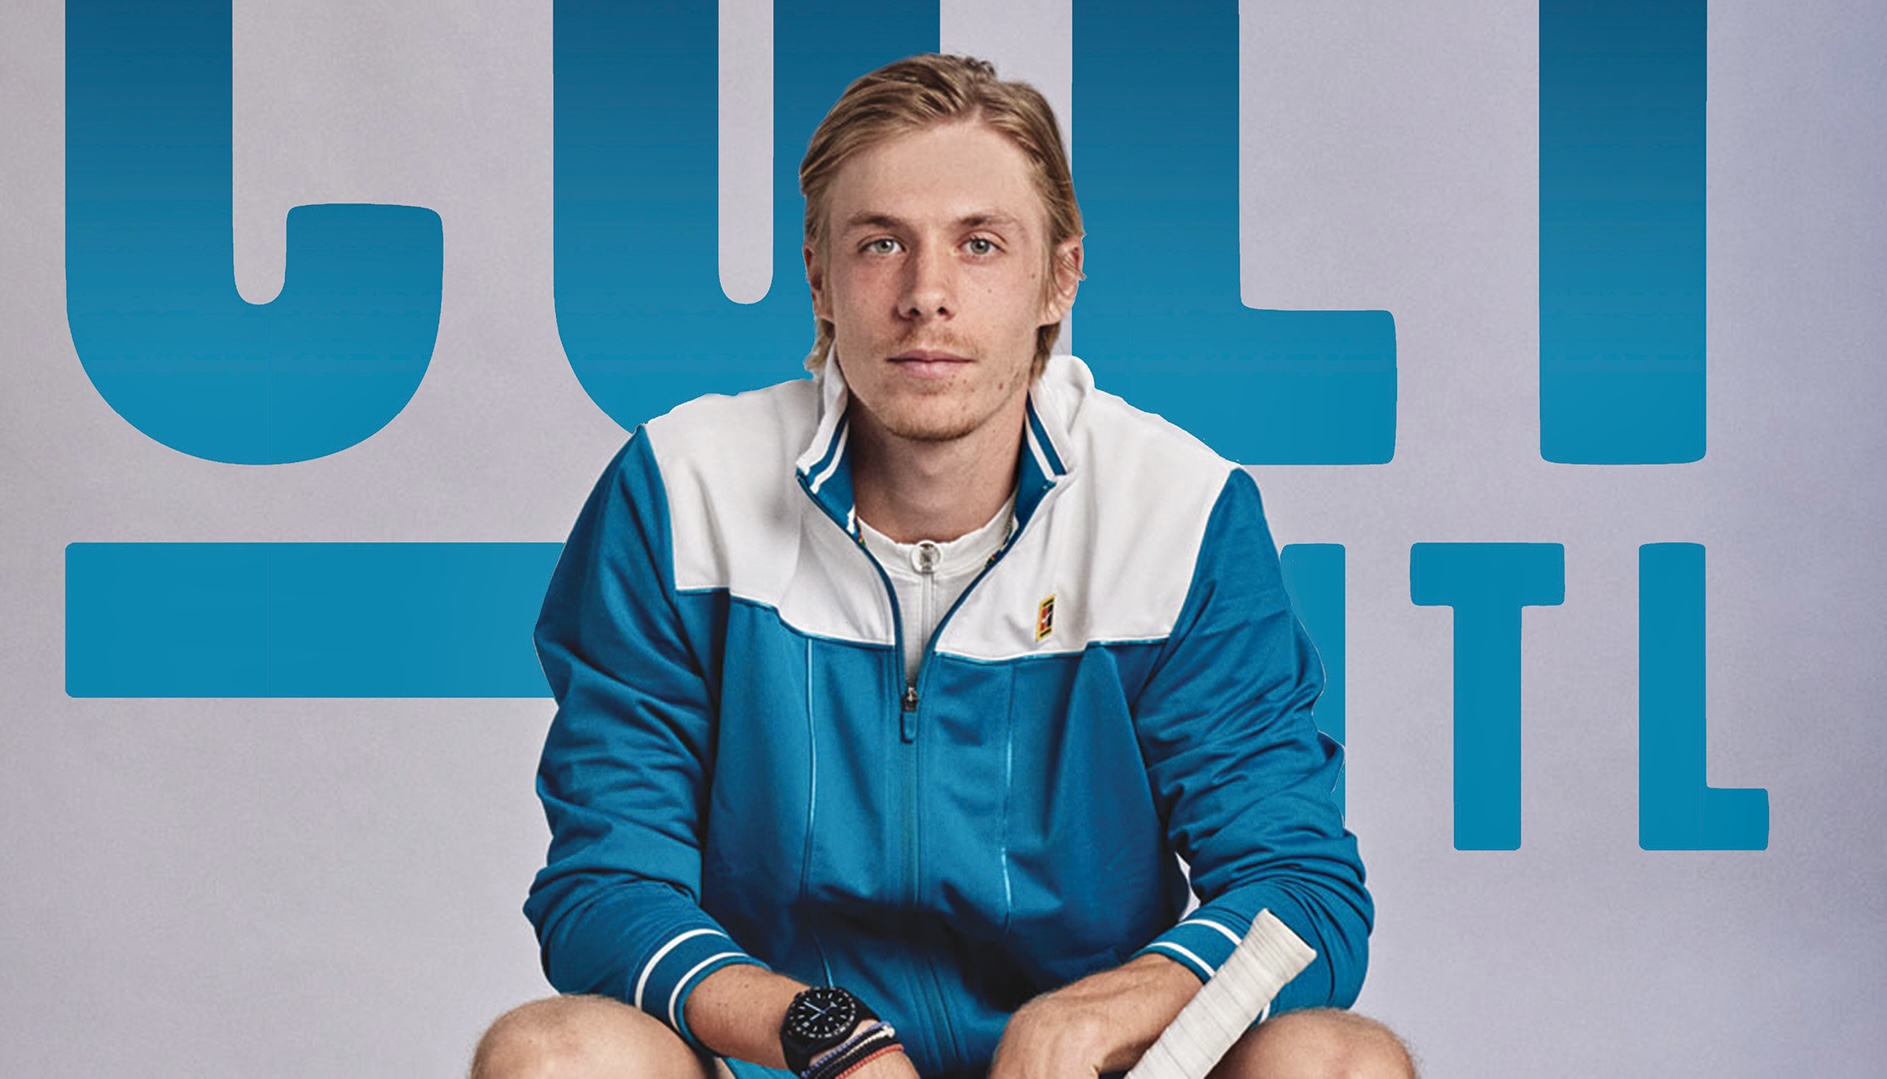 Our August issue features Denis Shapovalov